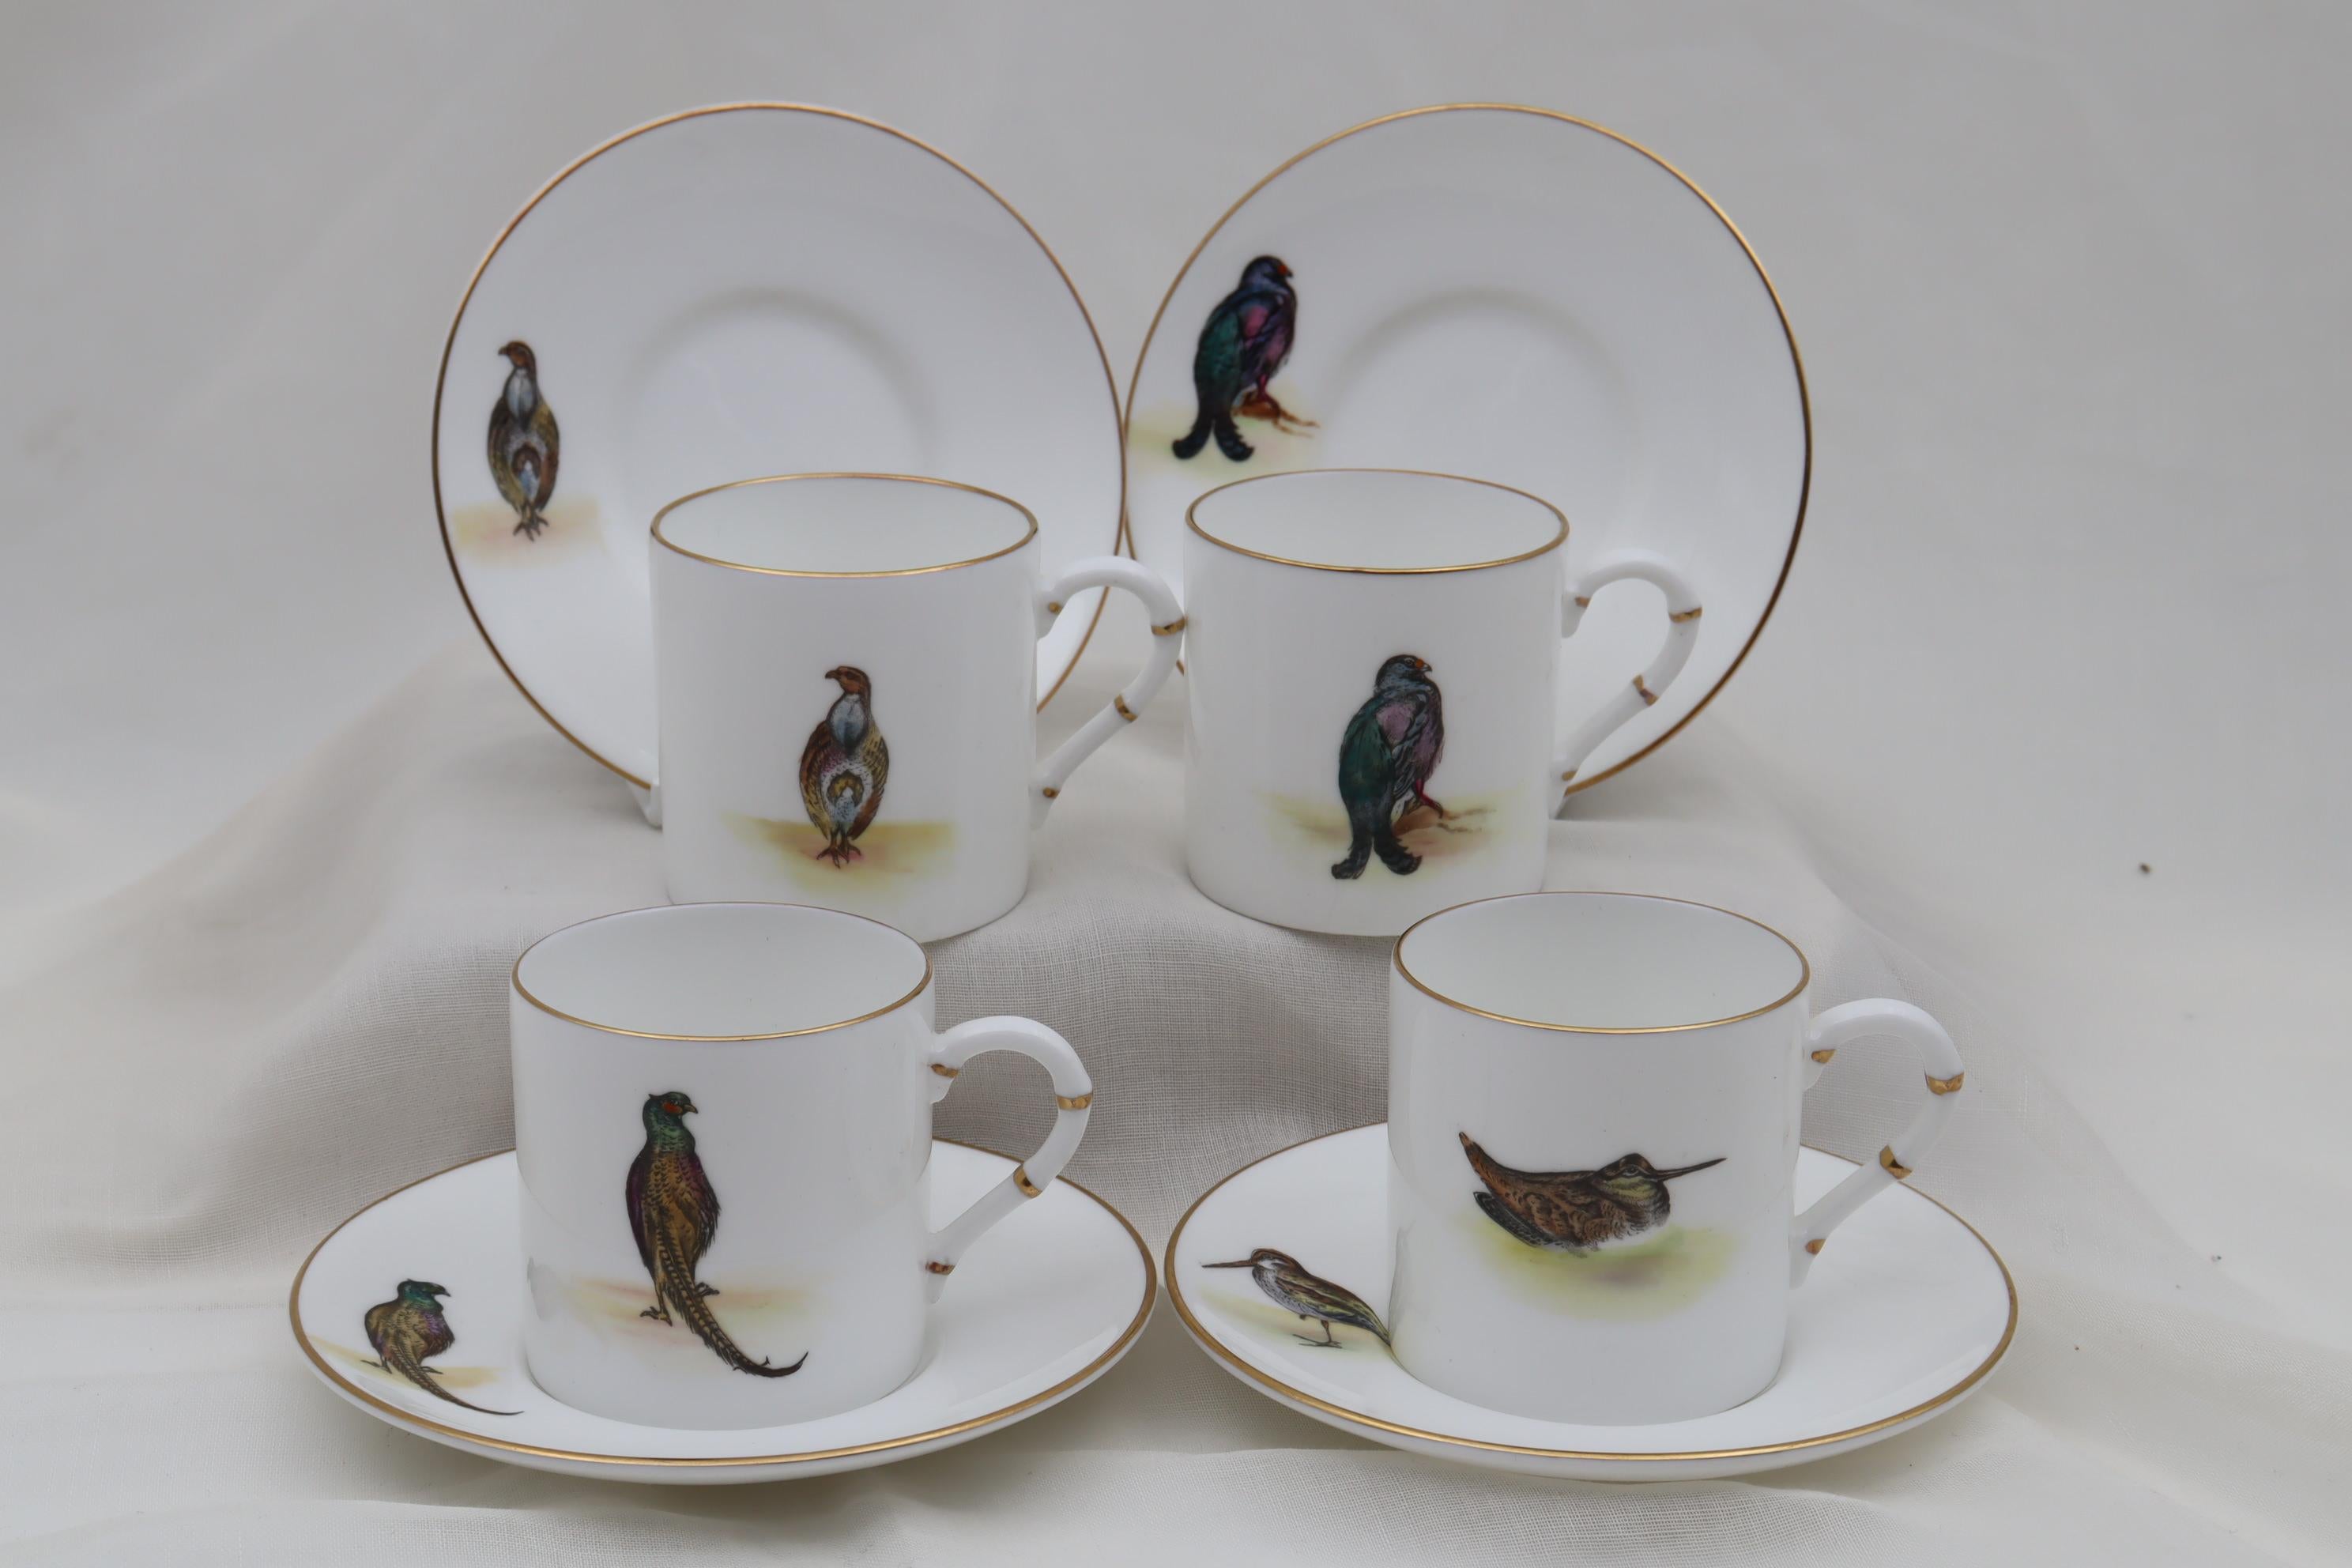 These very finely potted Royal Worcester porcelain demitasse, or coffee cans, and their saucers, are decorated with hand coloured prints of birds (pattern Z 2655) and finished off with hand gilding. They are in very good condition and date from the